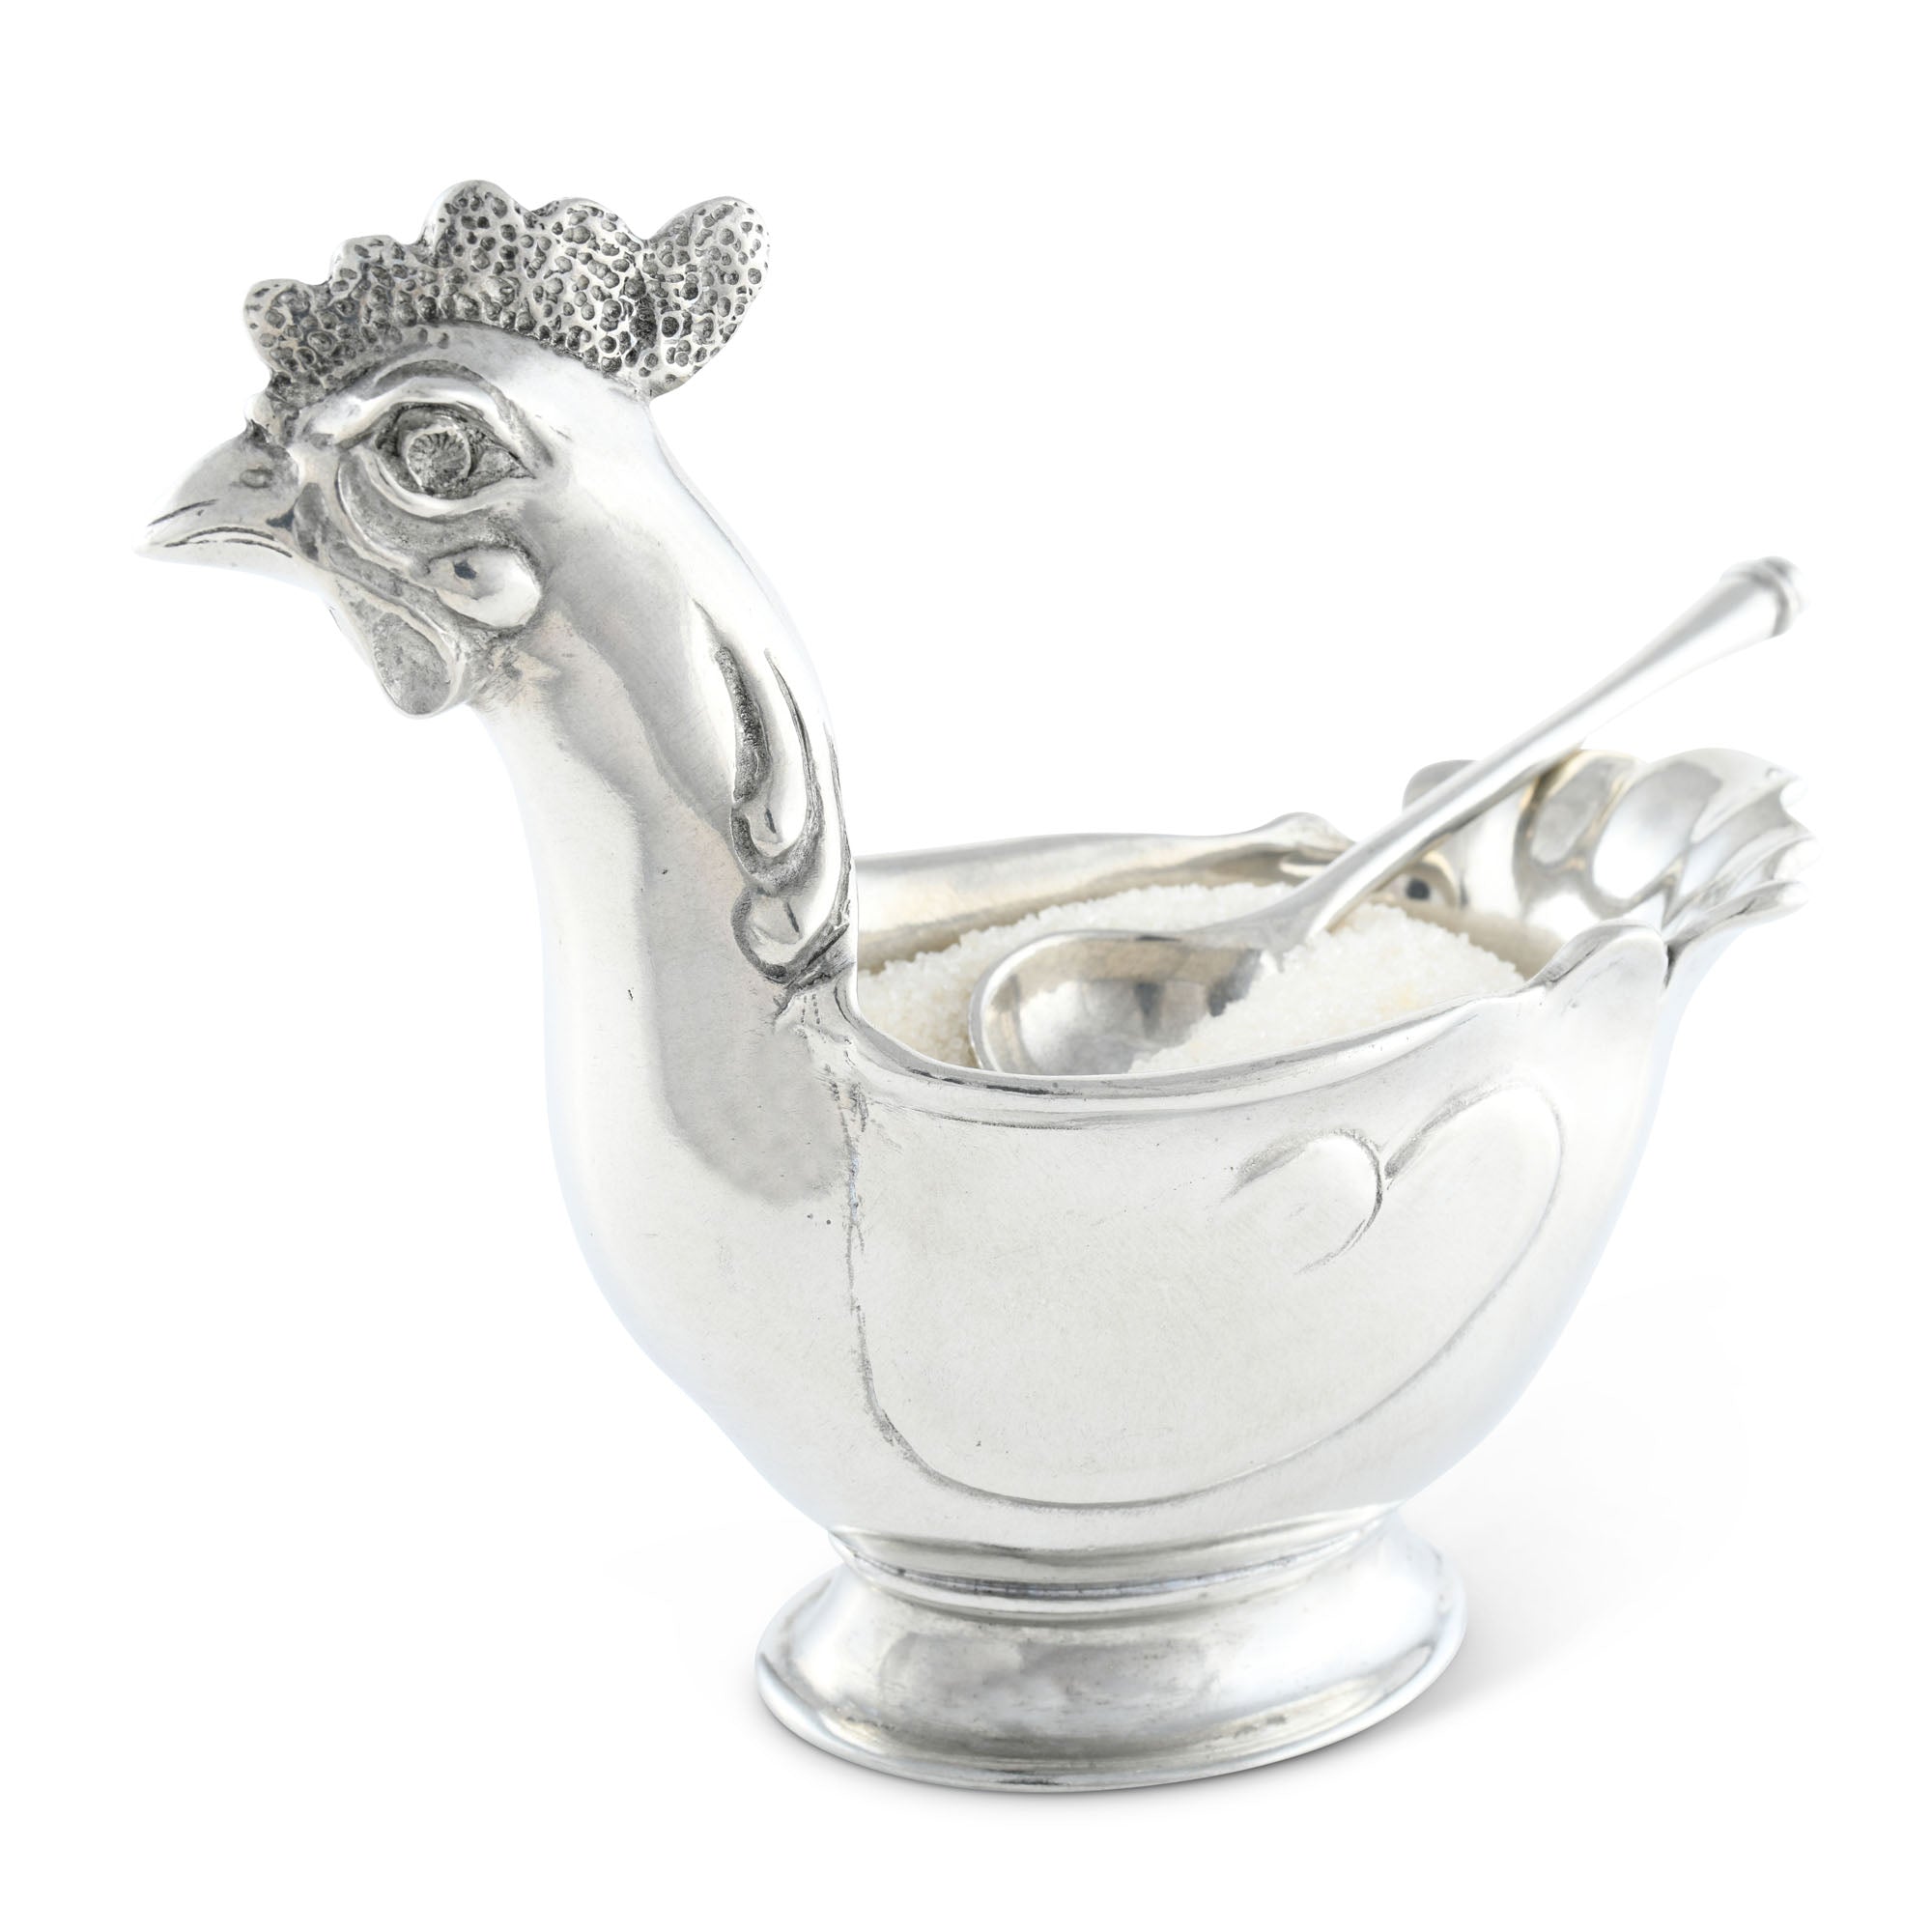 Vagabond House Hen Sugar Bowl with Spoon Product Image